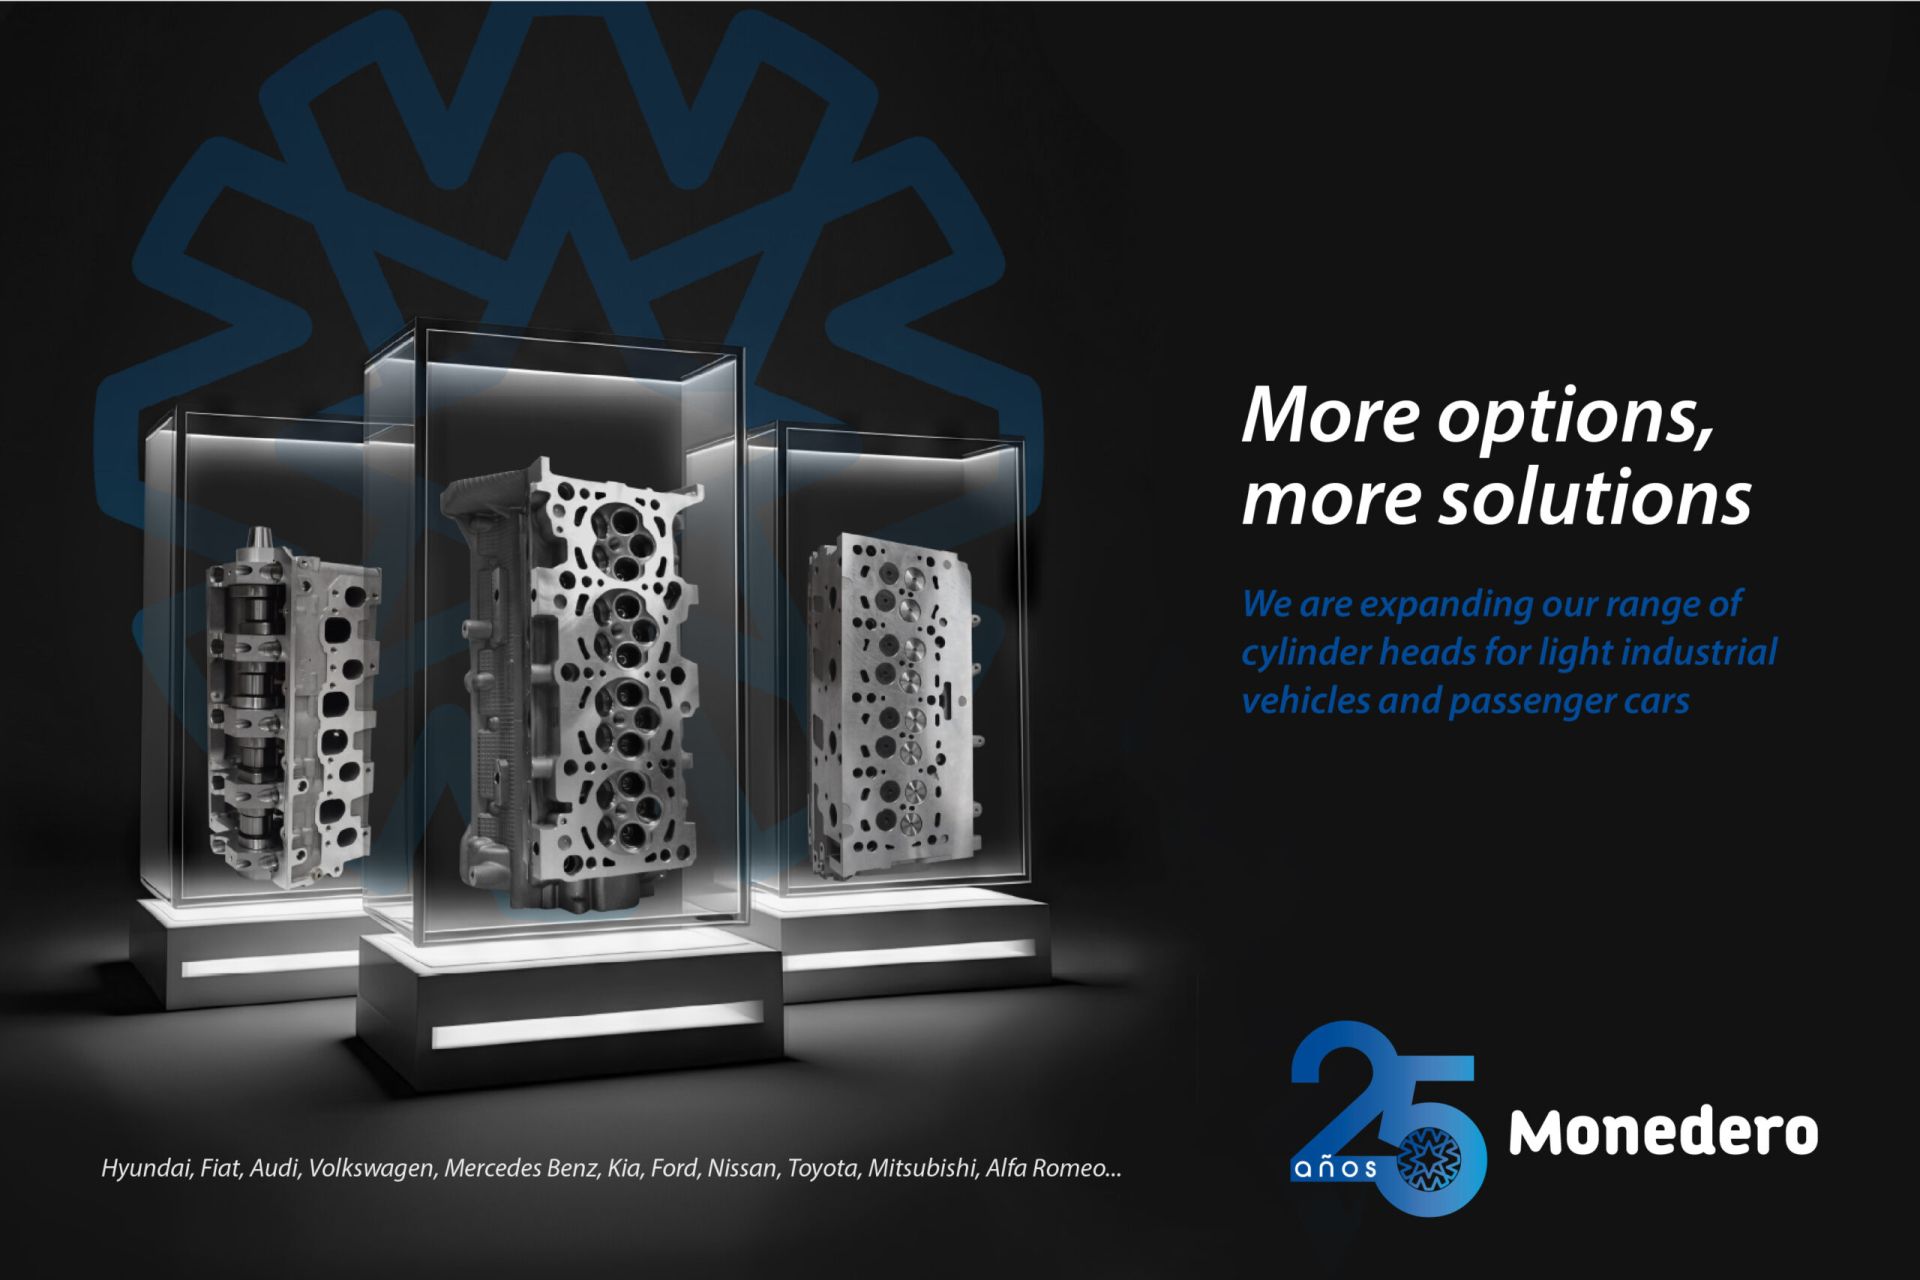 Monedero launches new cylinder heads for LIV and passenger cars.